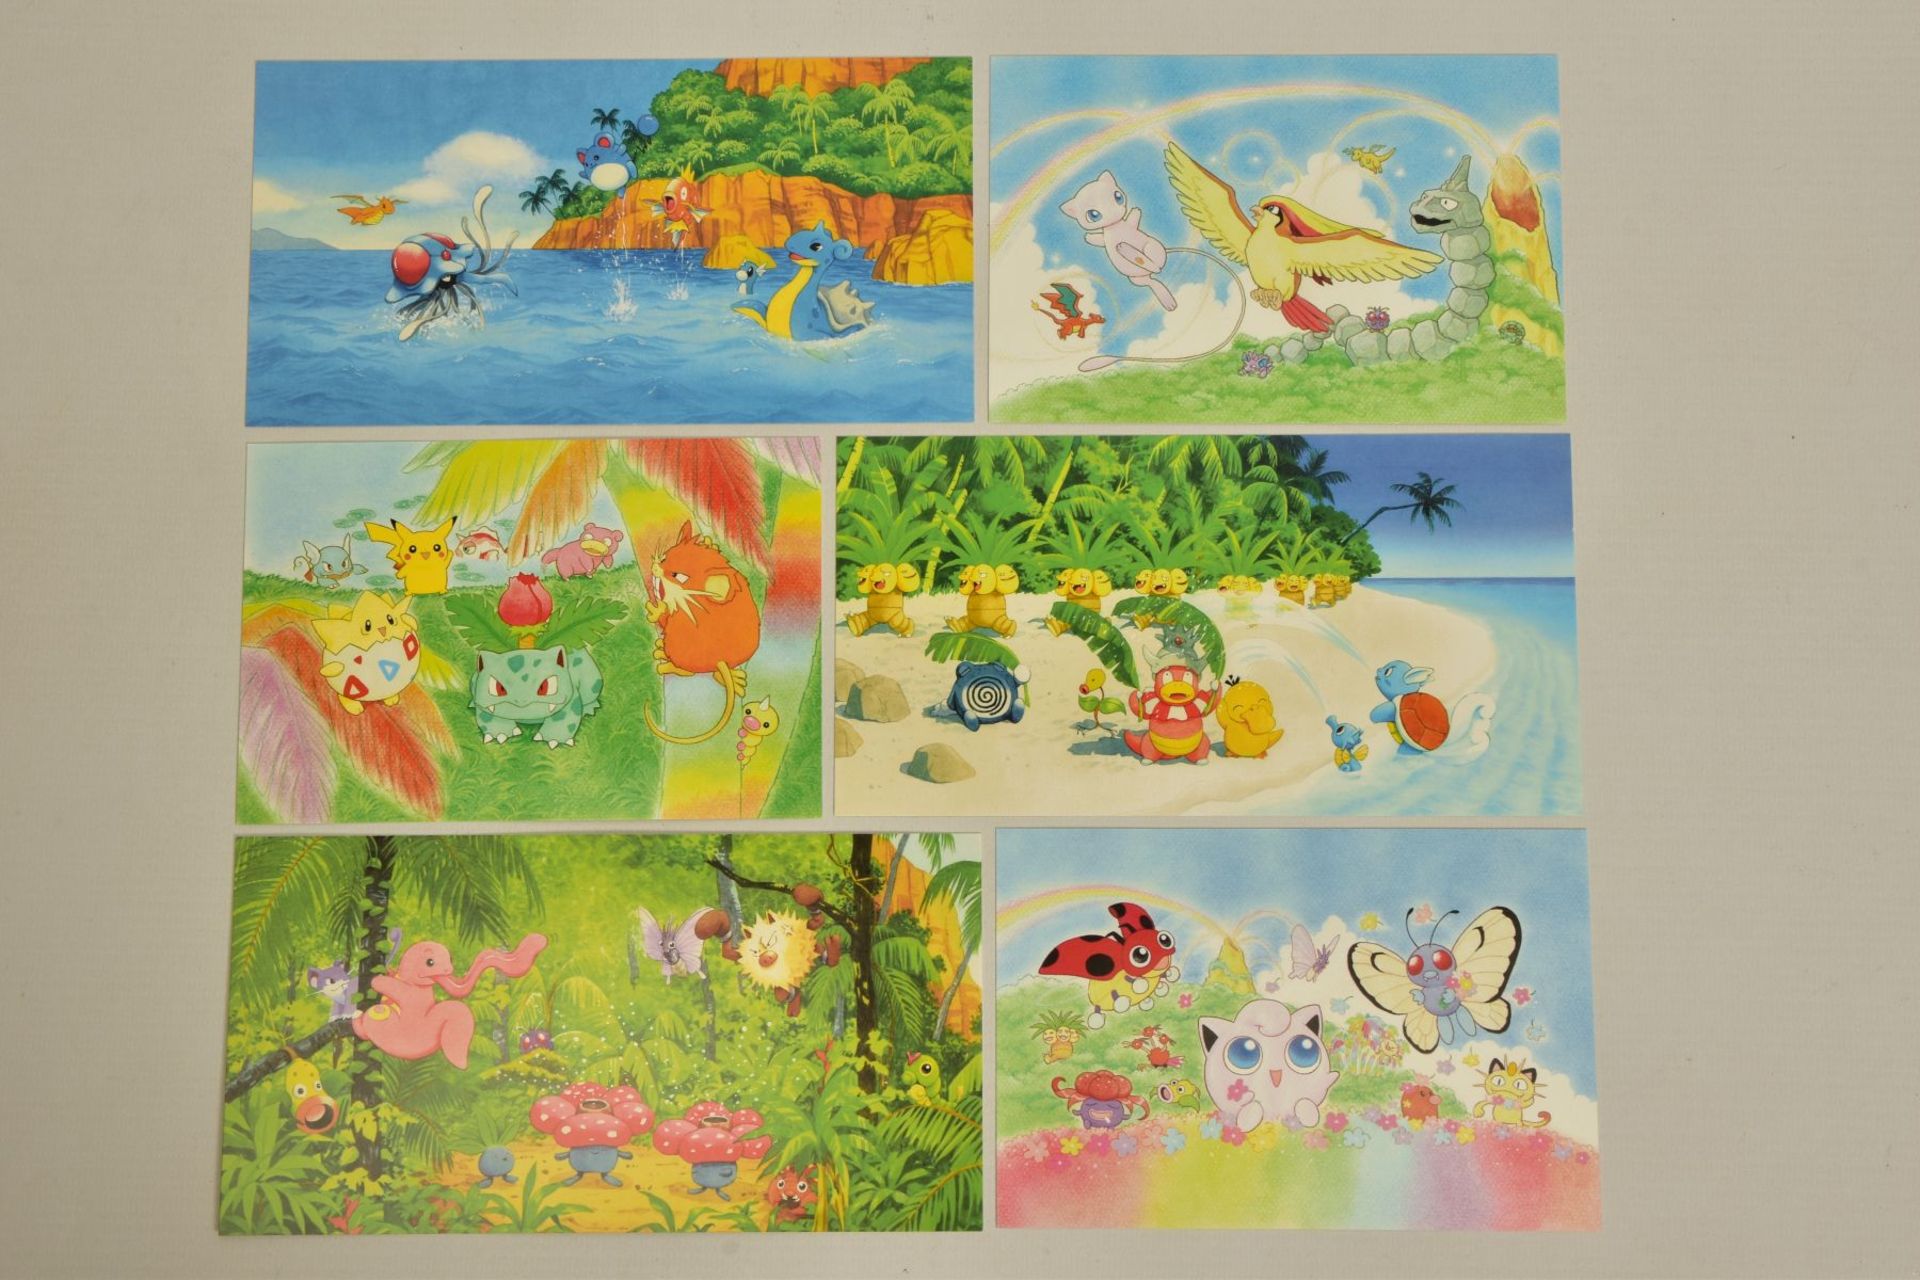 A COMPLETE POKEMON SOUTHERN ISLANDS COLLECTION CARD SET, in original presentation folder with - Image 8 of 9